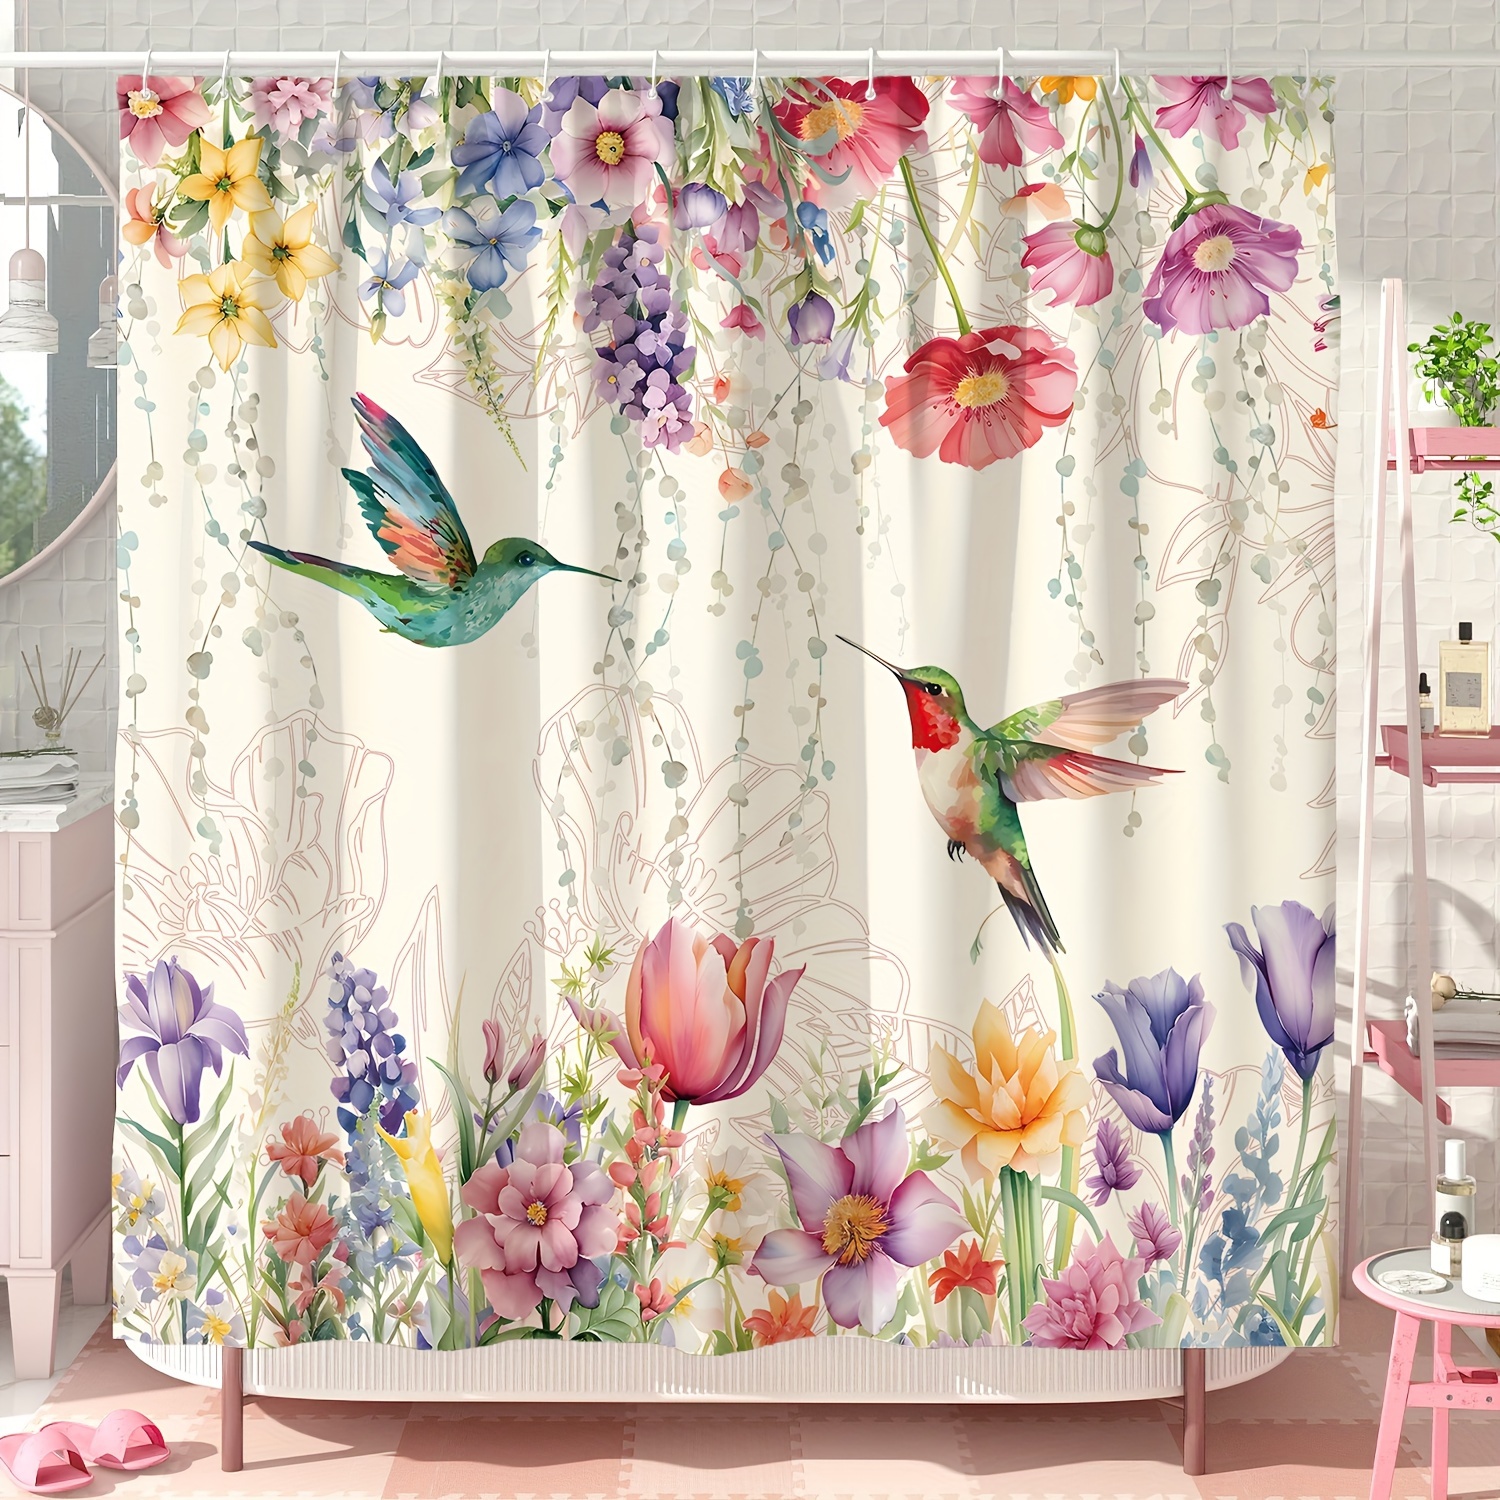 

1pc Hummingbird Floral Shower Curtain, Waterproof Polyester Fabric, Rustic Farmhouse Bathroom Decor, Machine Washable, Beige/green/pink/purple/red, With 12 Hooks For Bathtub And Home Decoration